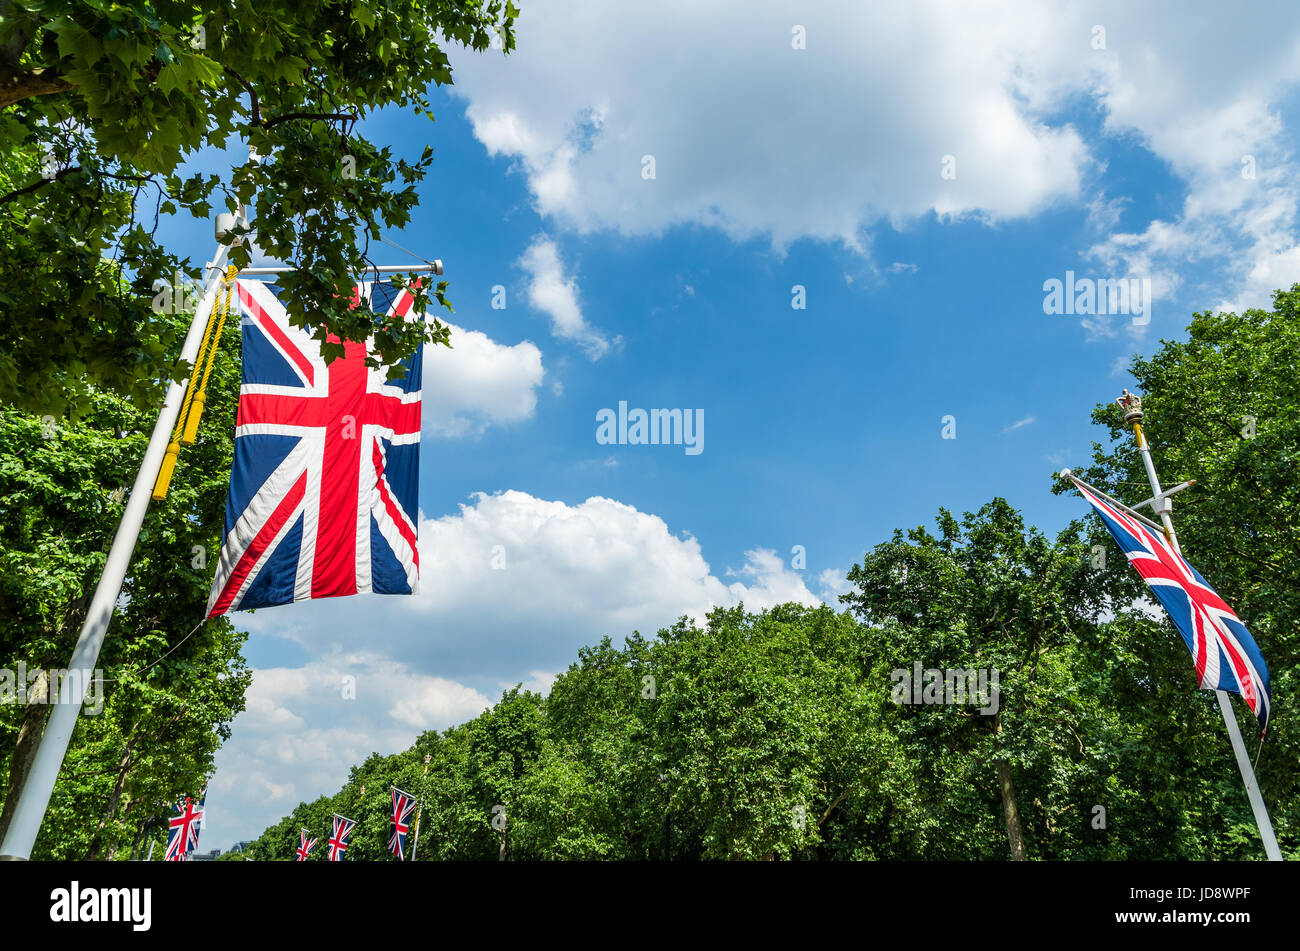 Union Jack flags by an avenue of trees Stock Photo